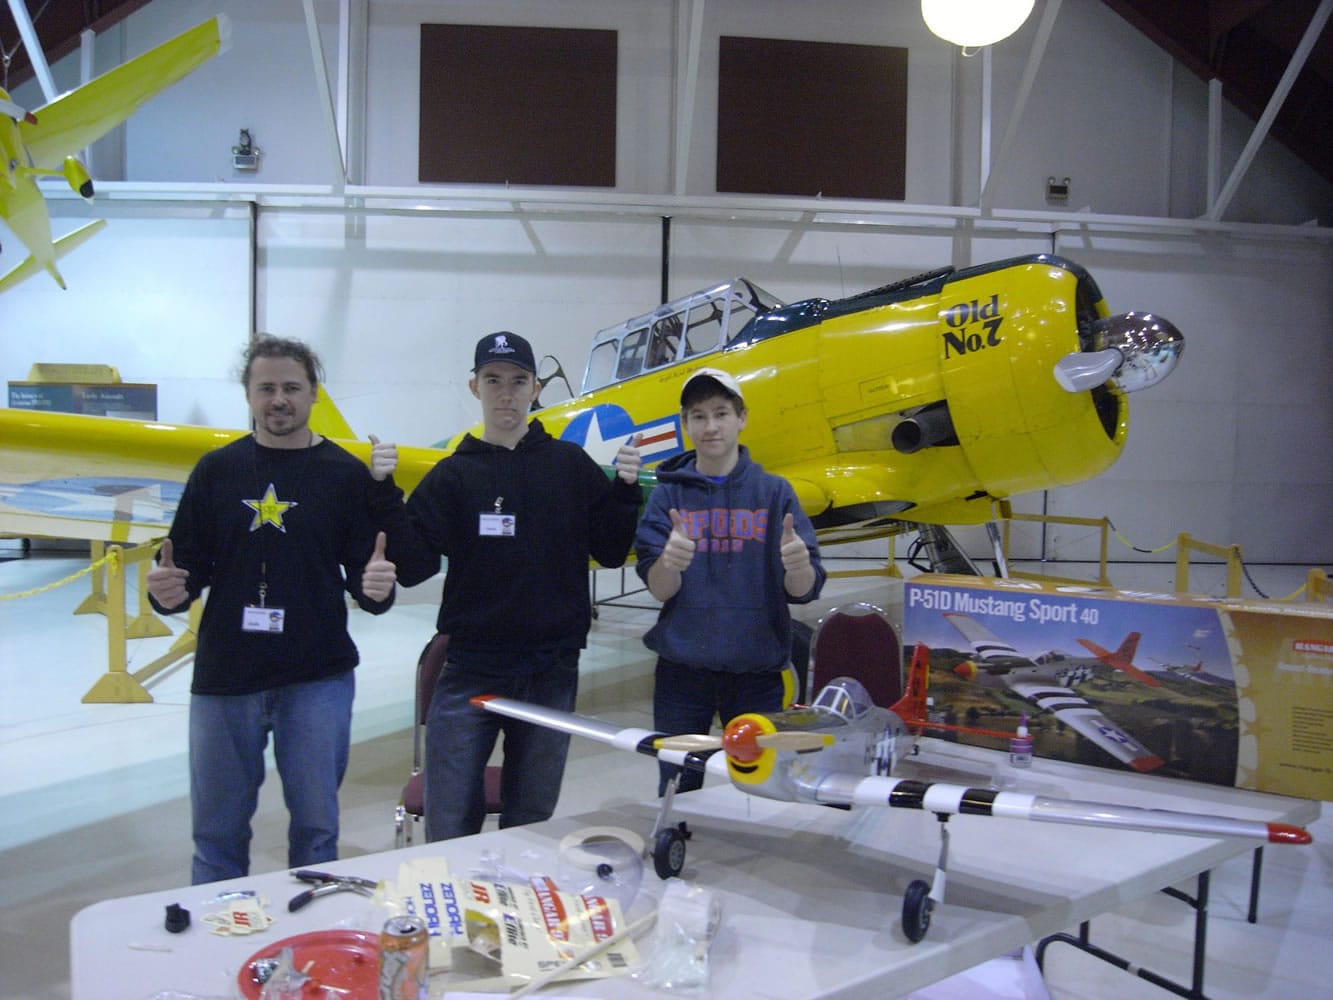 Hudson's Bay: Joshua Staley, left, airframe and power plant mechanic, Jason Brown, junior volunteer, and Carter Strader, Academy of Model Aeronautics member built a Red Tail model that will be part of the Tuskegee Airmen display at the Pearson Air Museum.